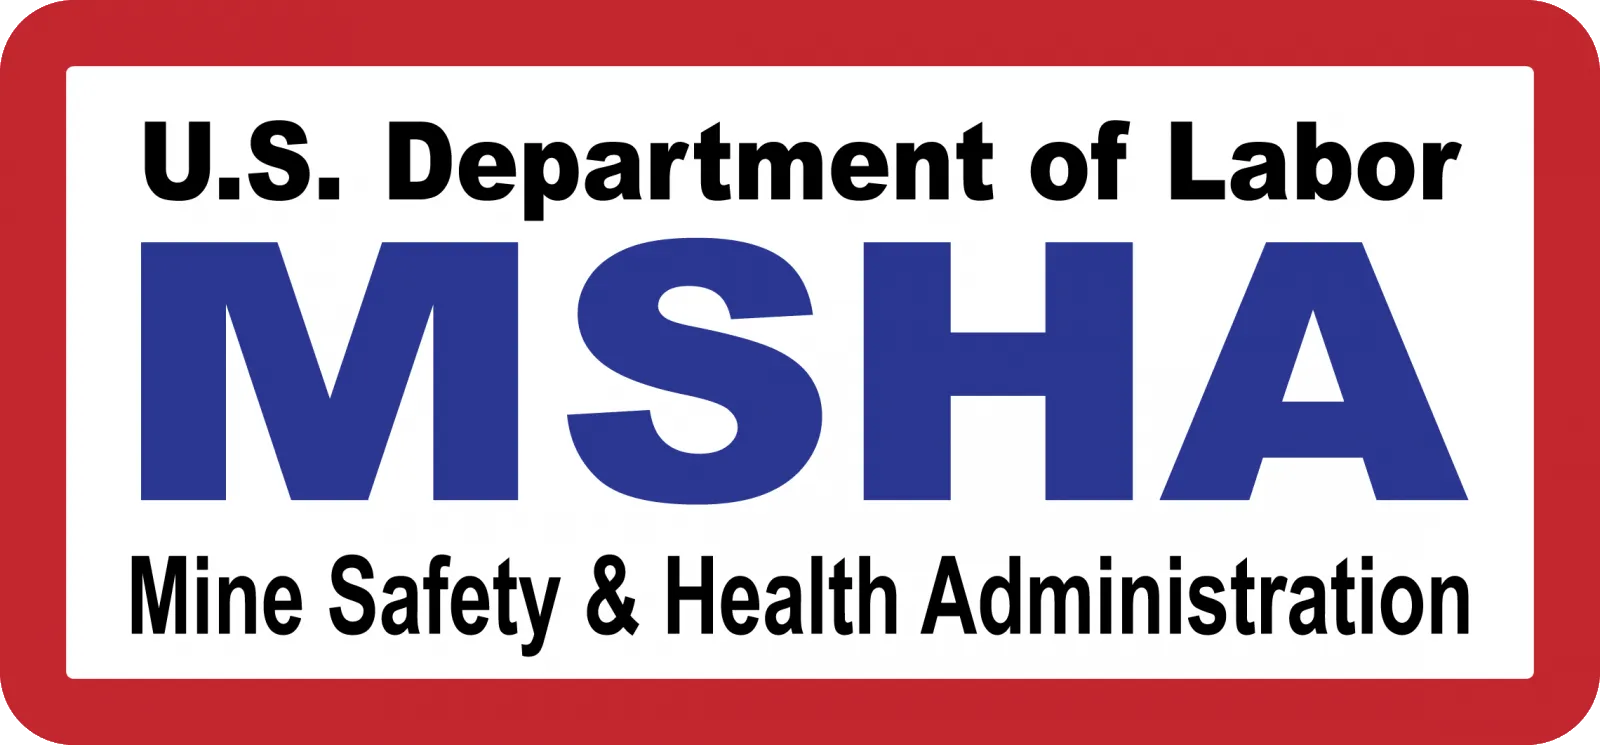 nine safety and health administration - logo